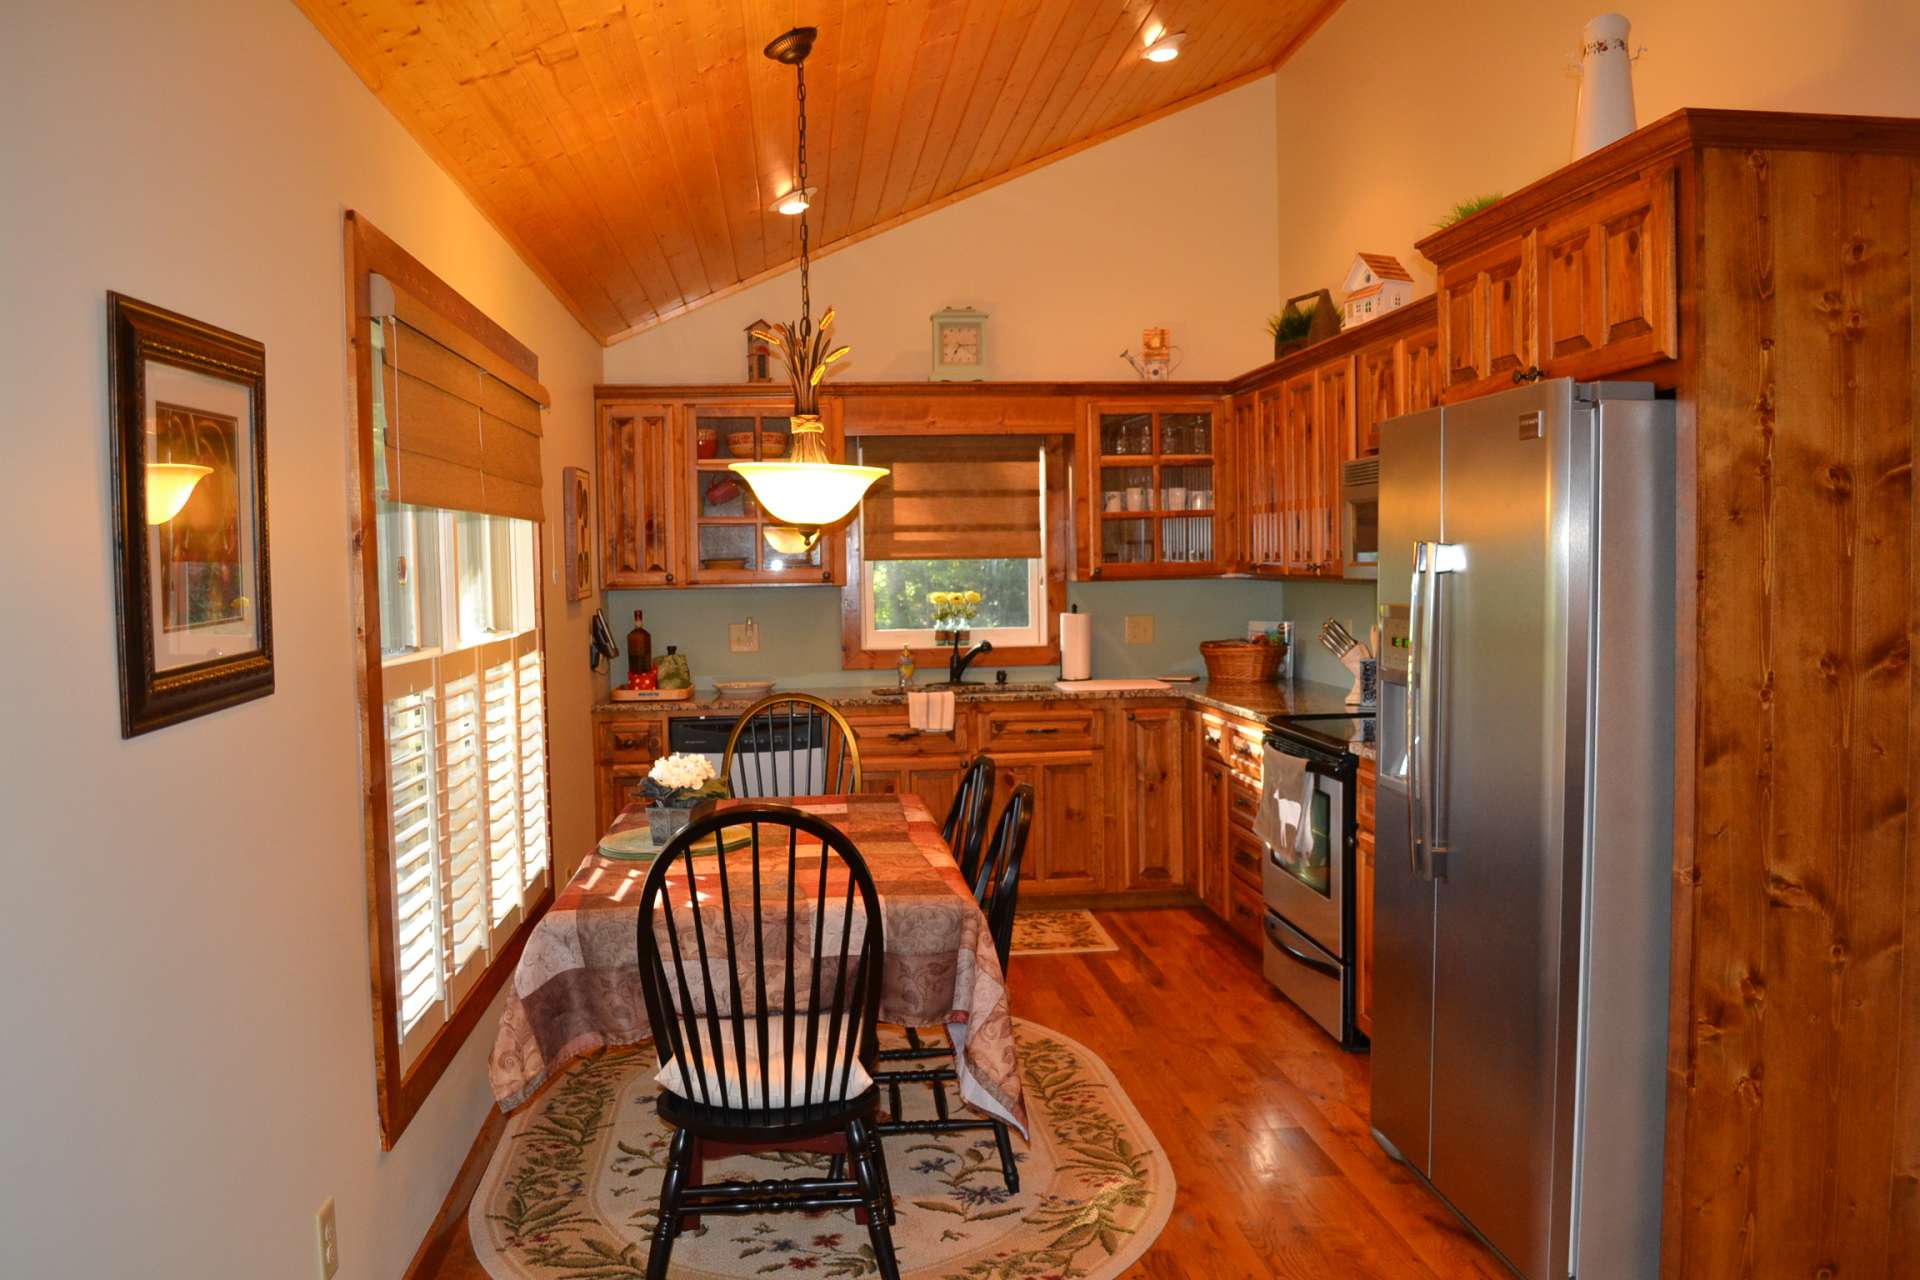 The kitchen, with granite counters & stainless appliances, is to the left as you enter from the front porch.